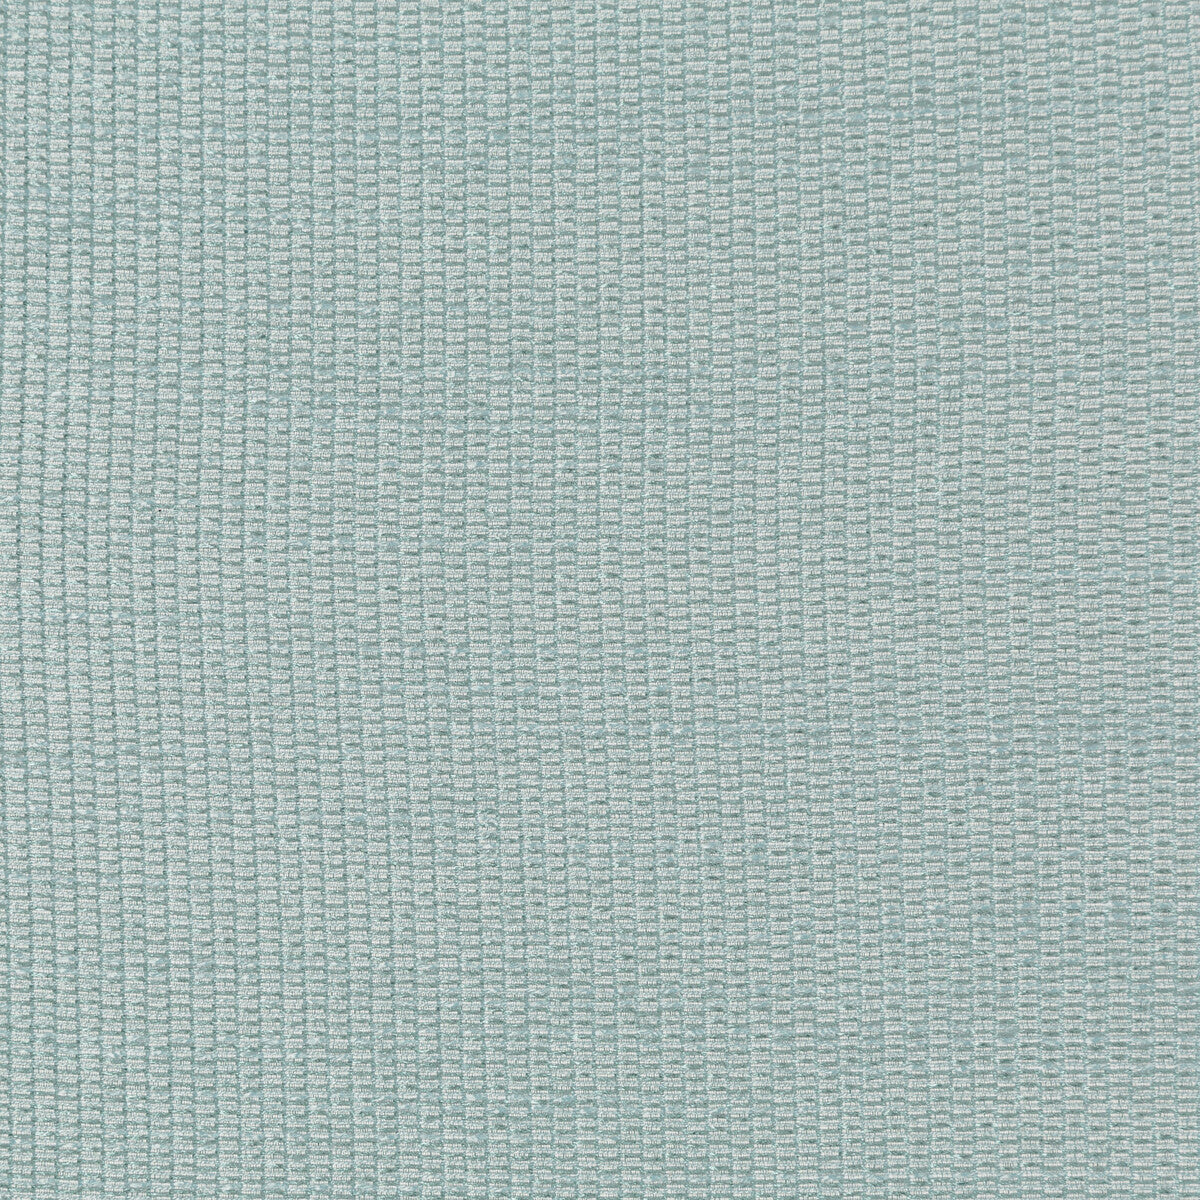 Hadley fabric in sea green color - pattern 4652.35.0 - by Kravet Contract